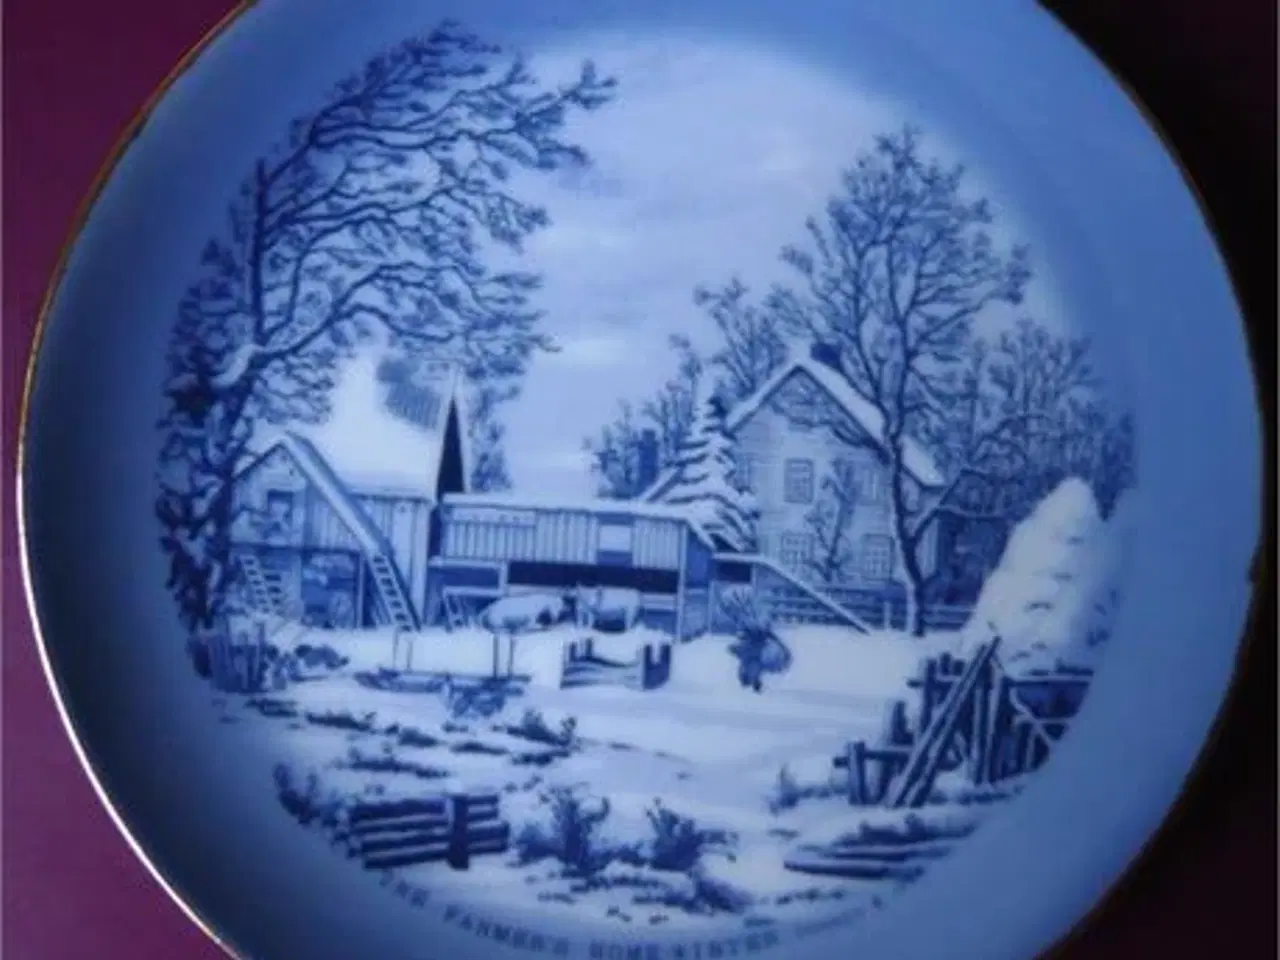 Billede 1 - Currier & Ives - Platte The Farmers Home-Winther